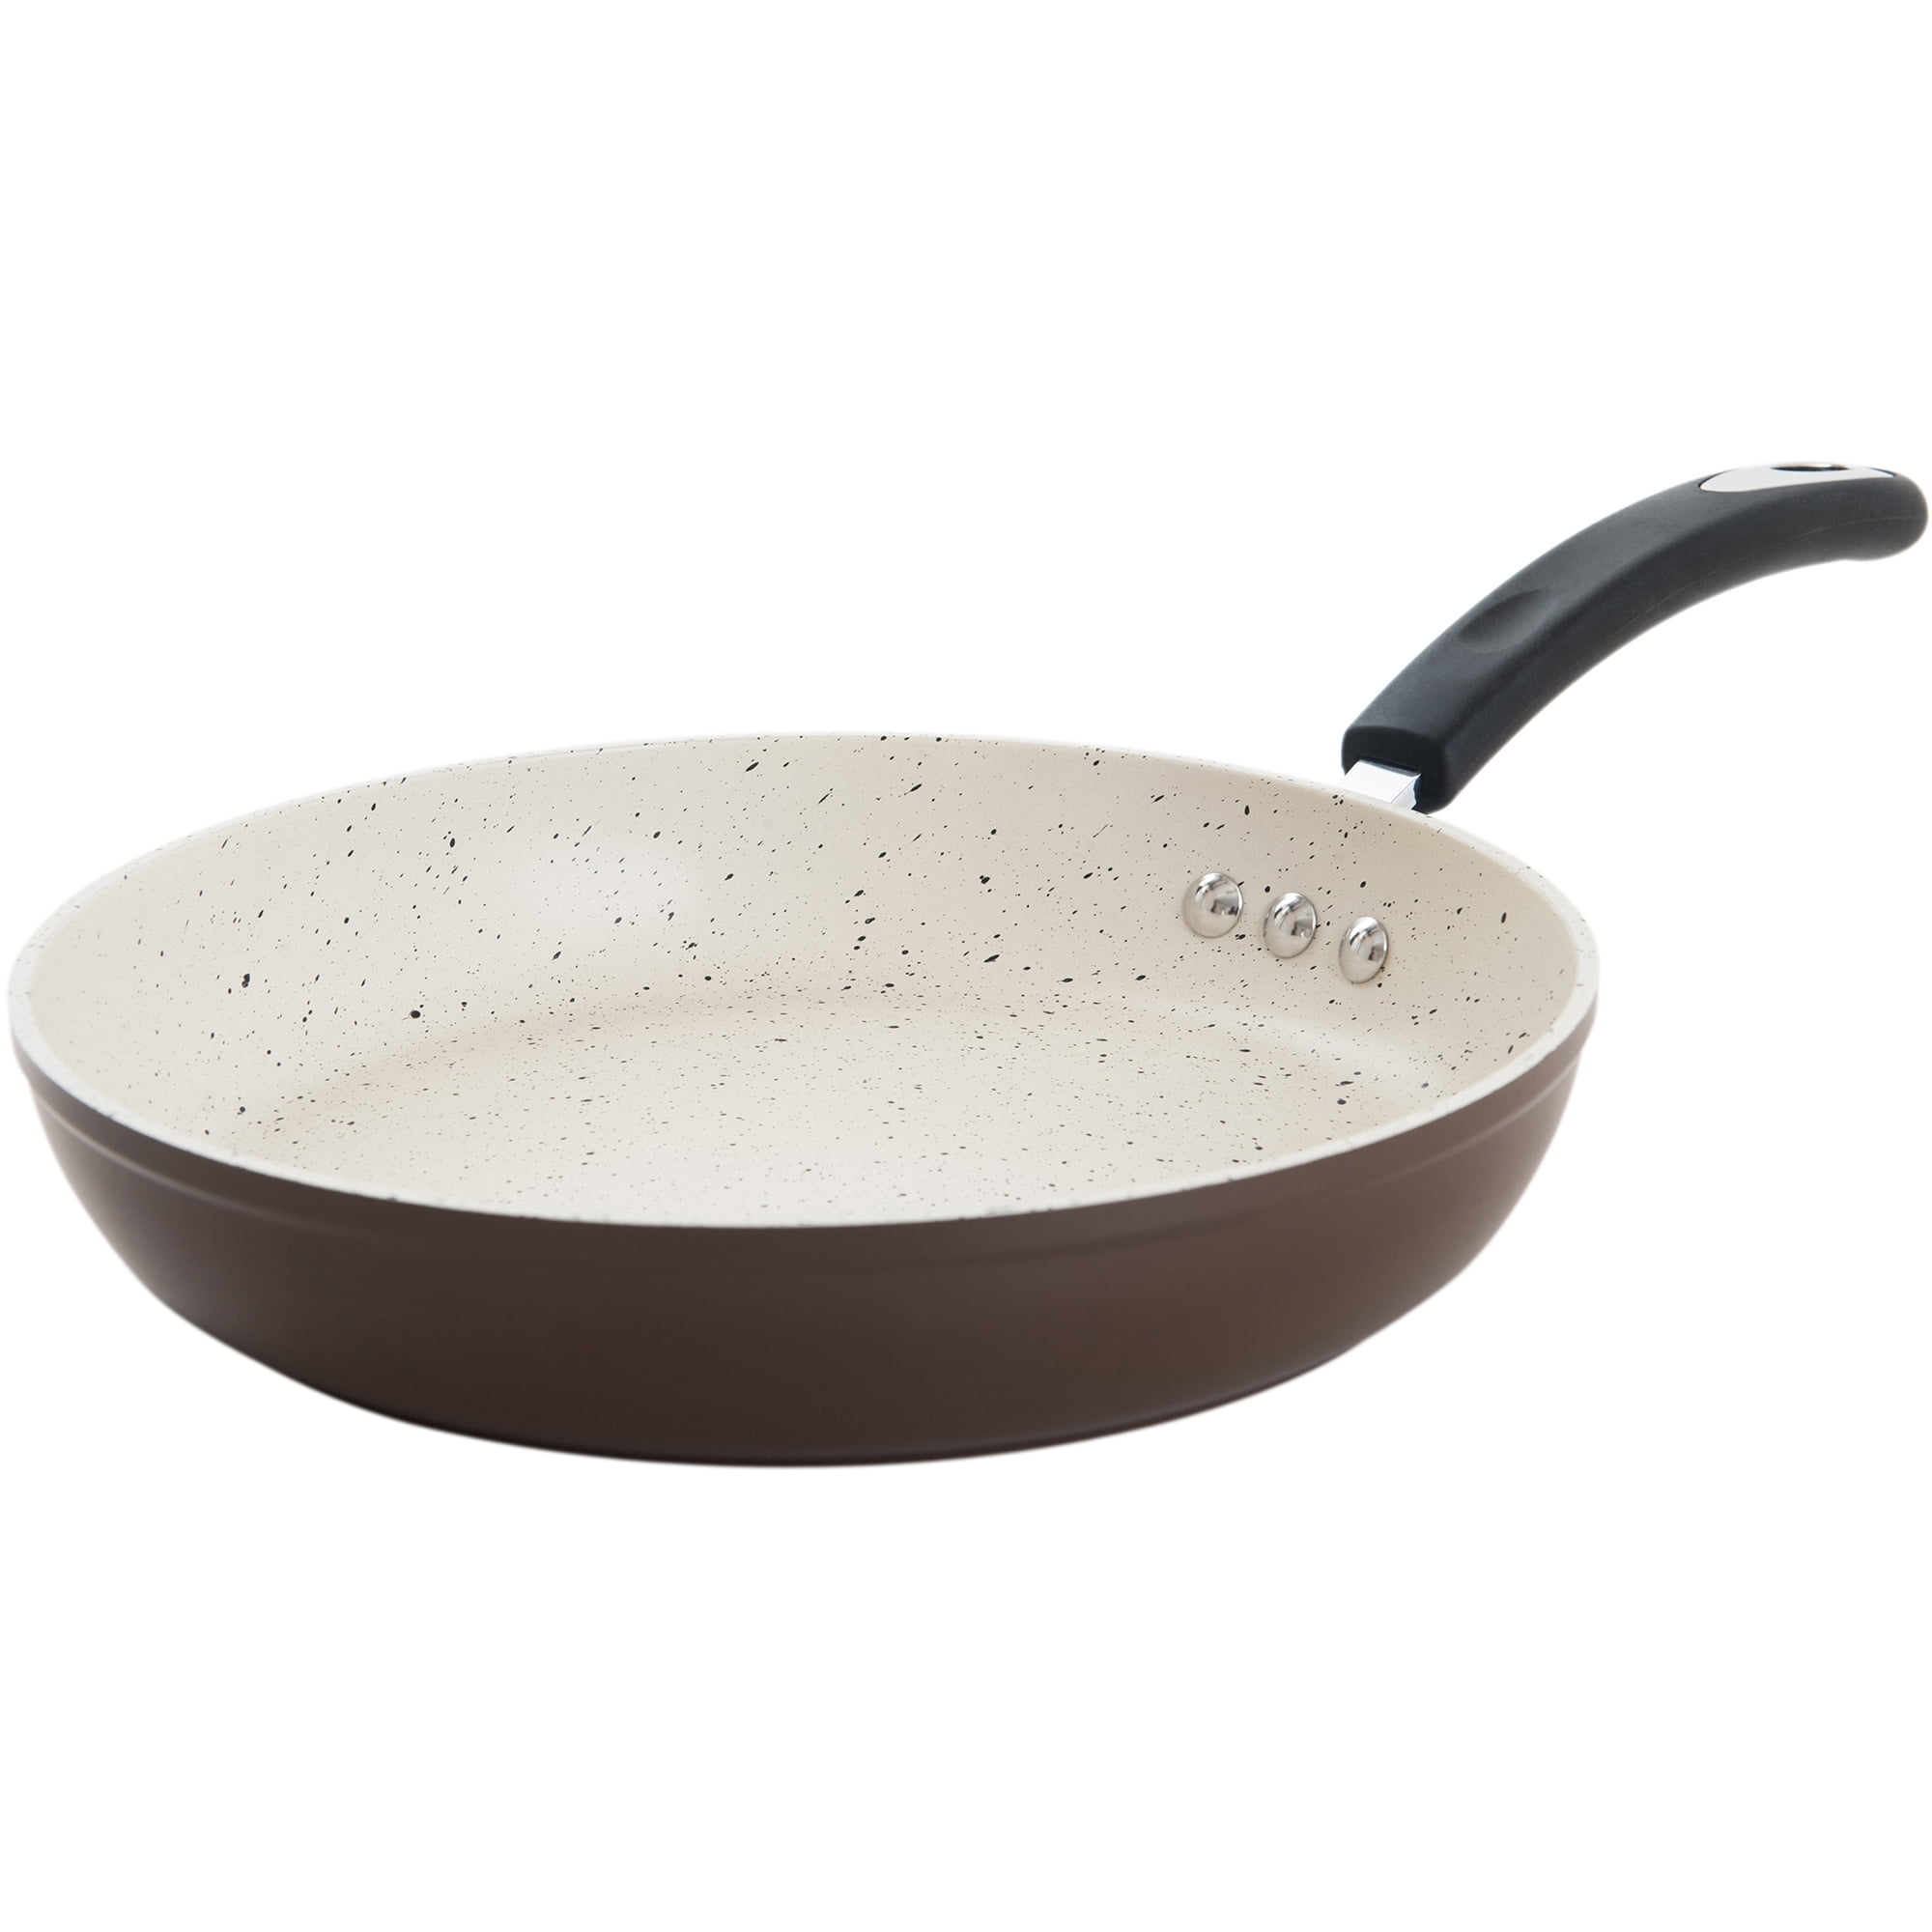 Cyrret Stone Frying Pan 8 inch, Nonstick Small Omelet Pan with 100% Apeo&pfoa-free Stone Non Stick Coating, Granite Skillet Pan for Cooking, Nonstick